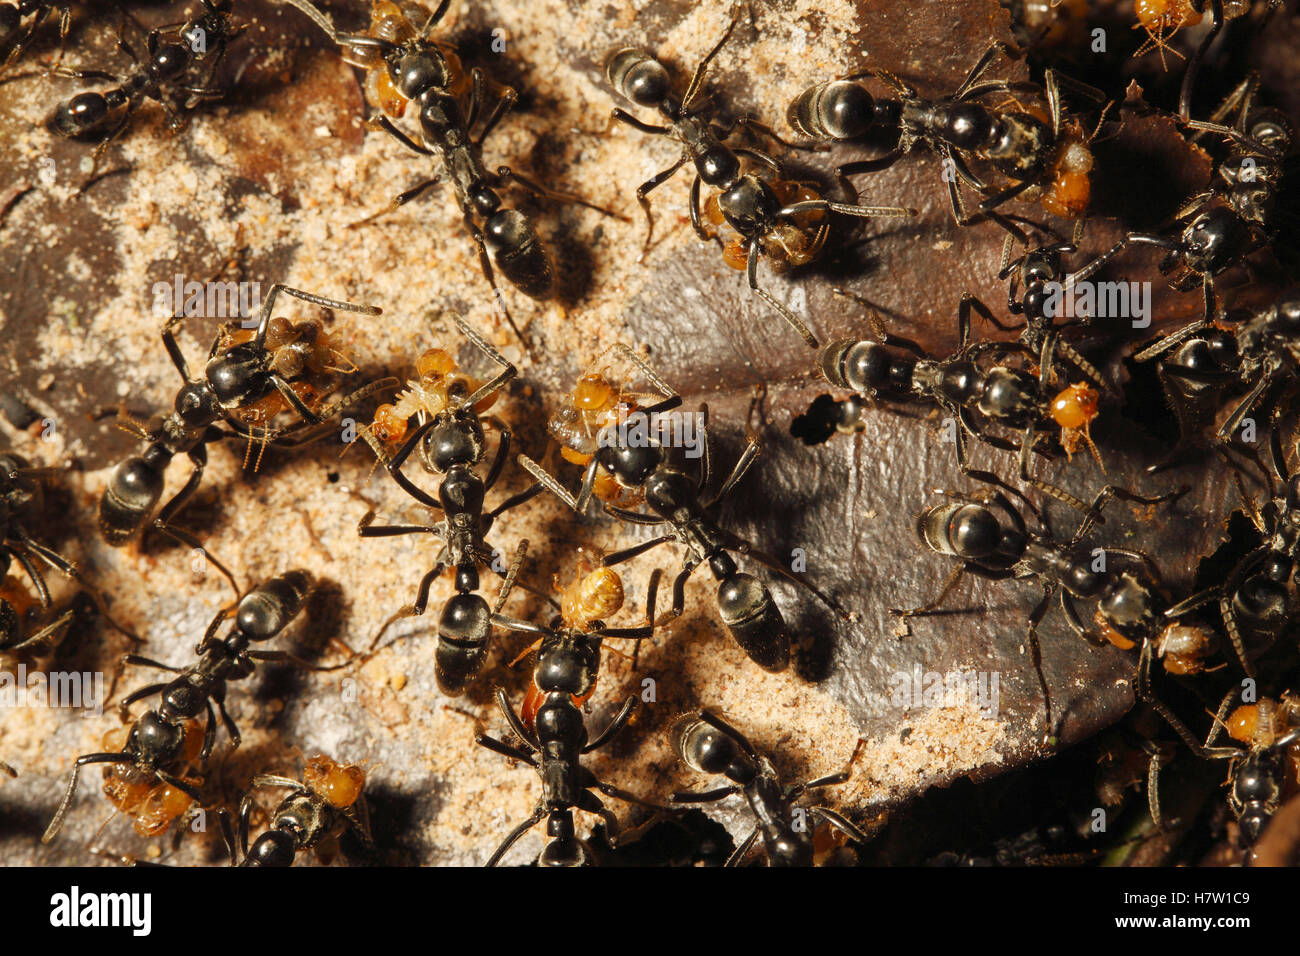 Ant (Formicidae) group attacking termite colony, Lobeke National Park, Cameroon Stock Photo